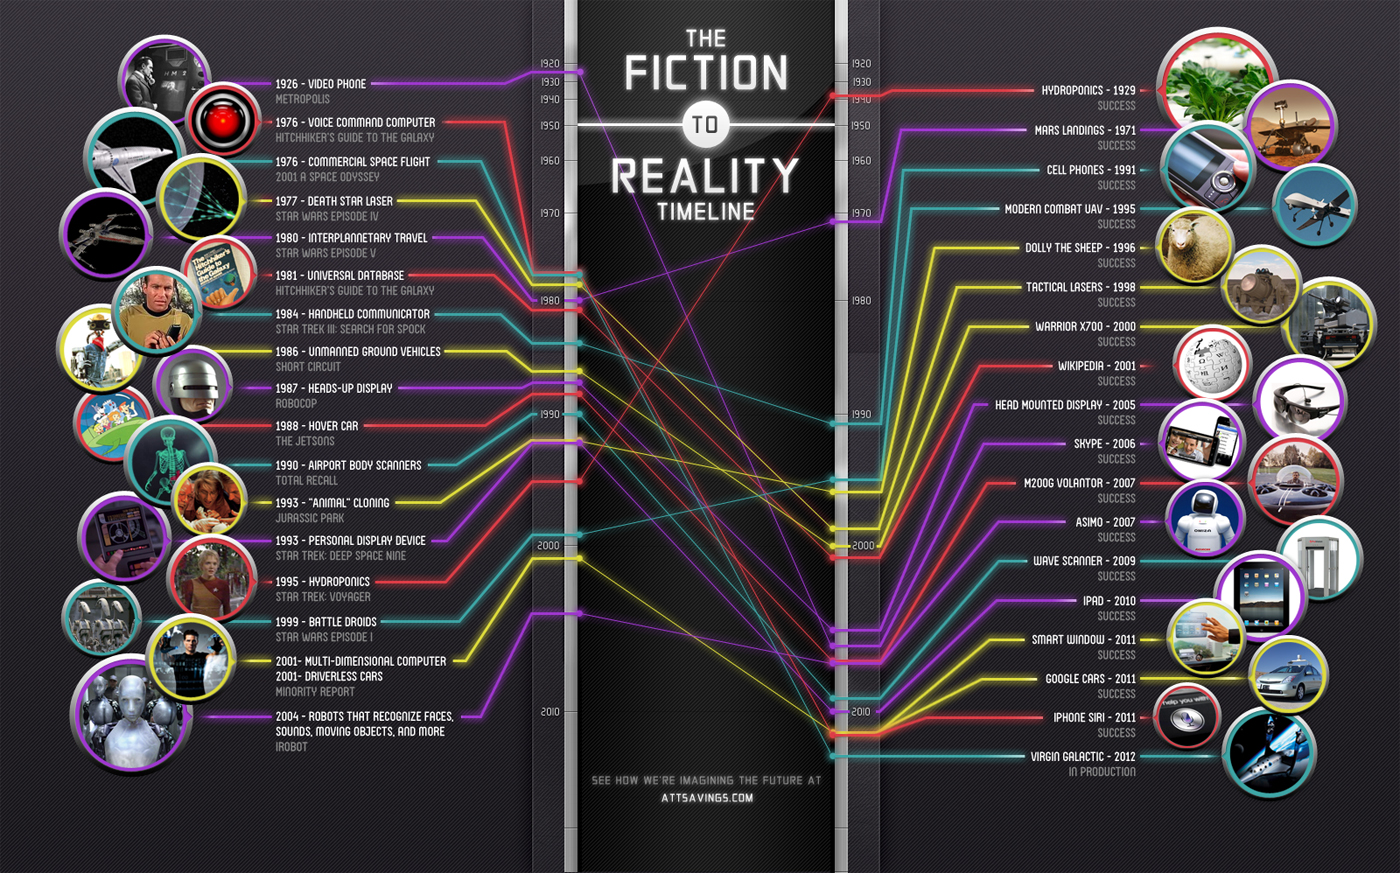 the fiction to reality timeline